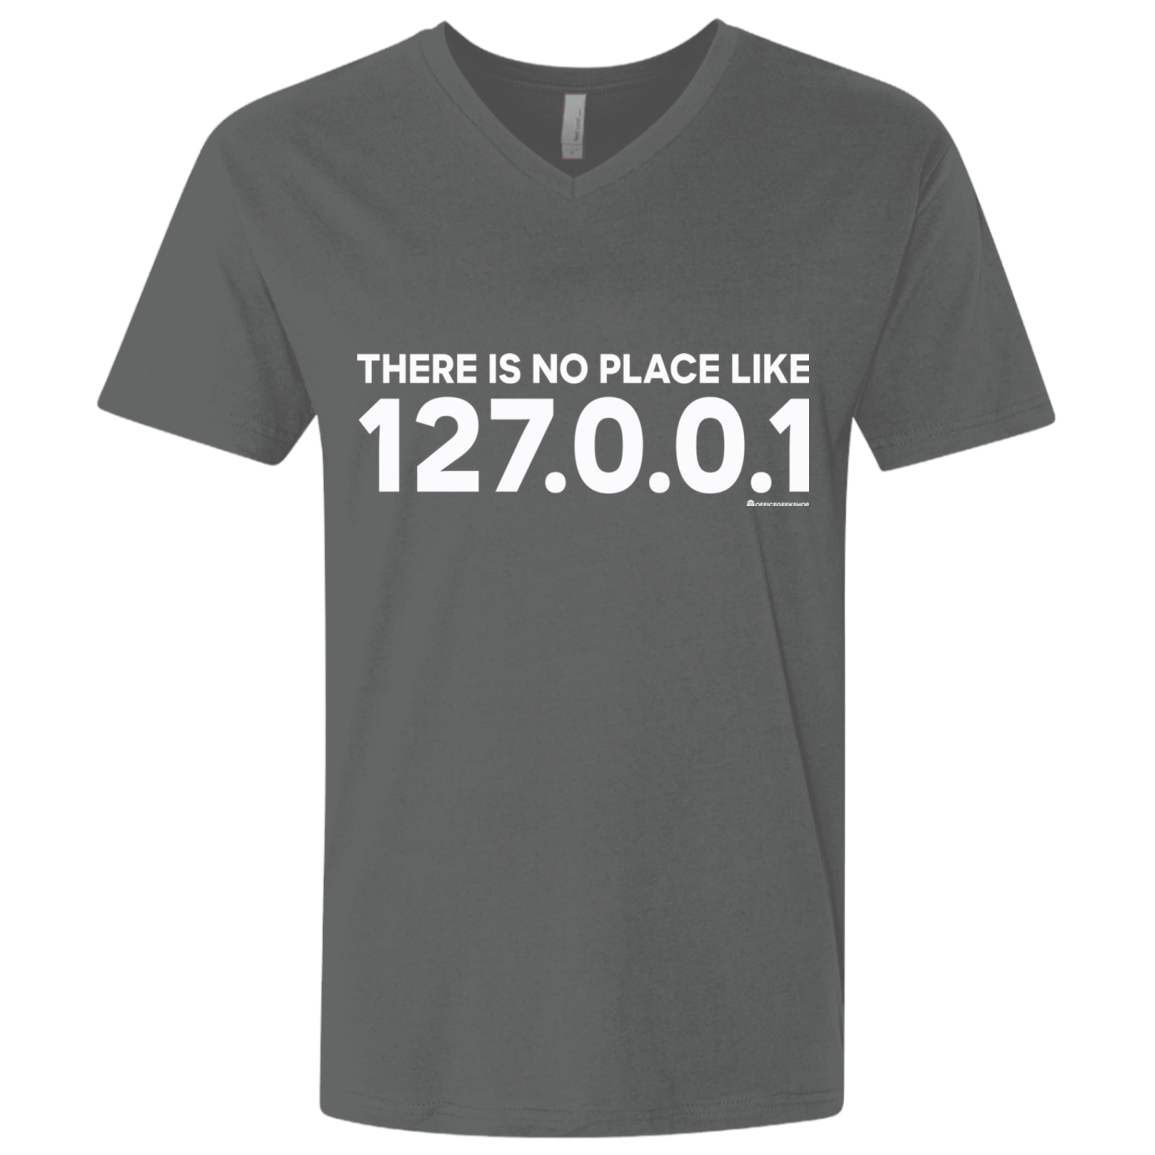 T-Shirts Heavy Metal / X-Small There Is No Place Like 127.0.0.1 Men's Premium V-Neck